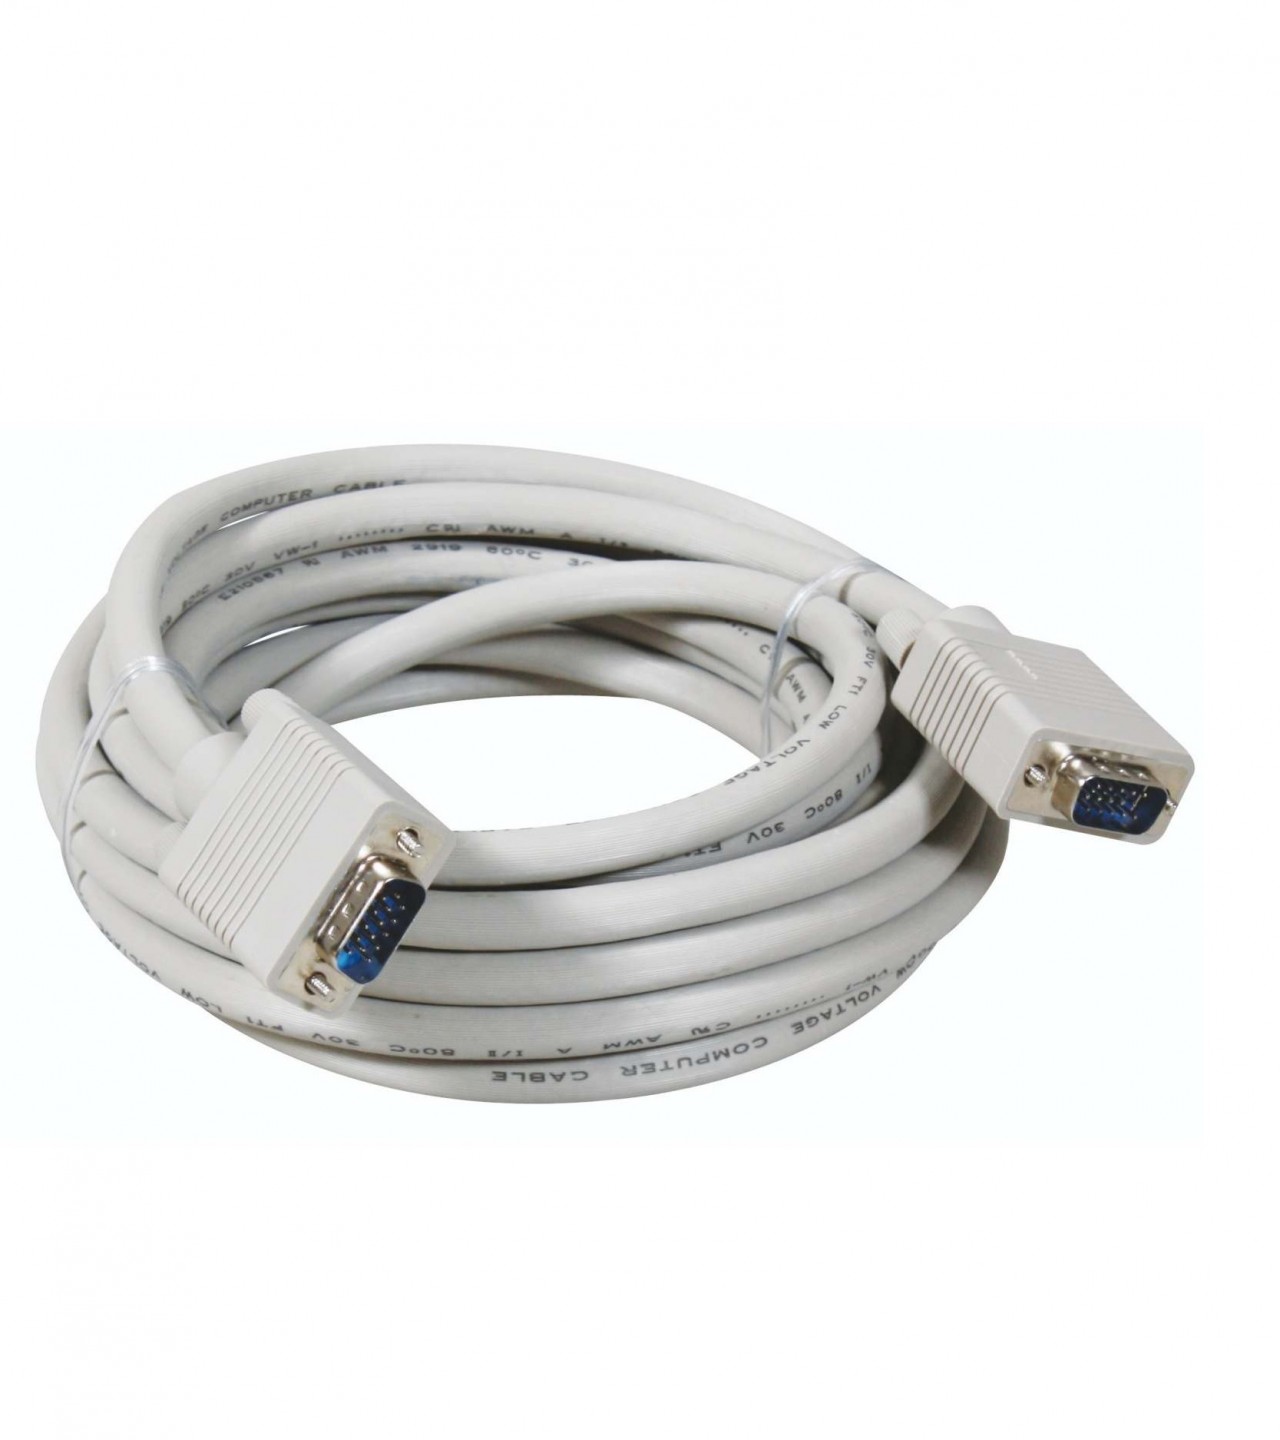 Vga Cable Male To Male OD 8MM 5m